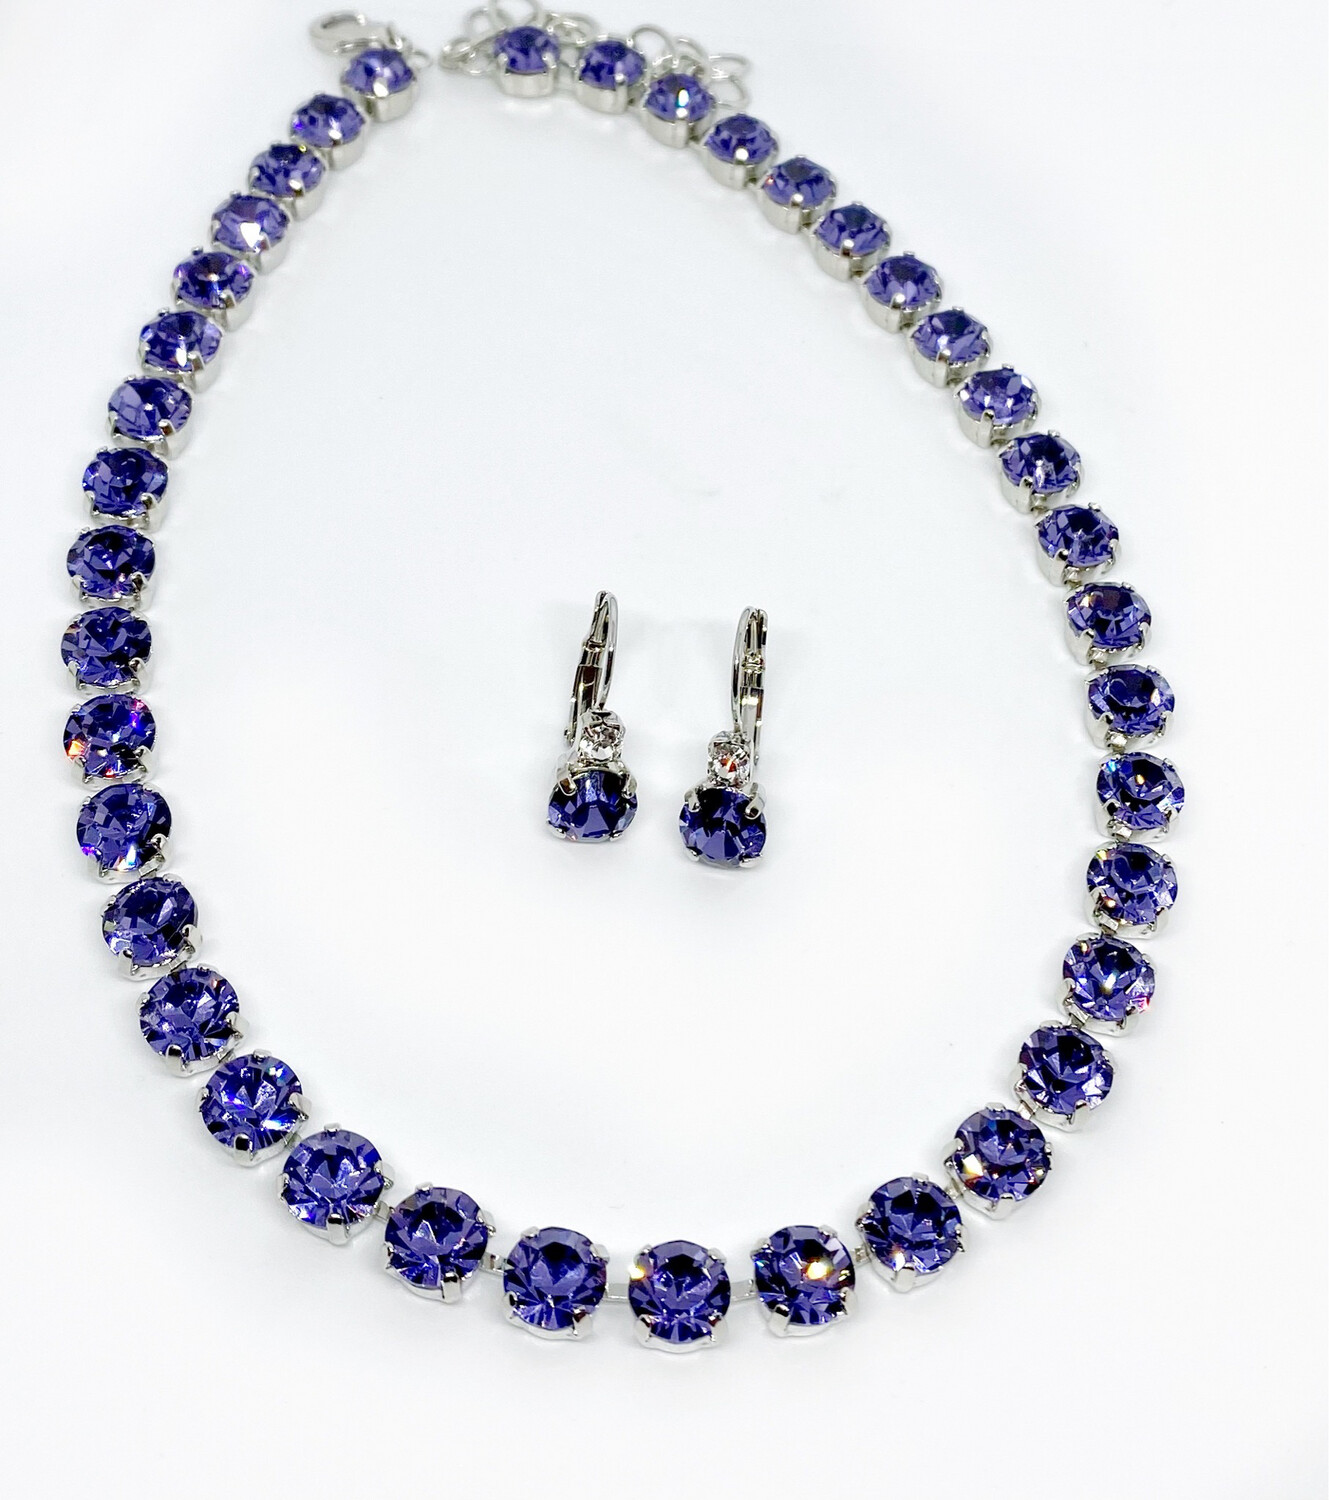 Crystal Necklace and Earrings, Color of the Year 2022